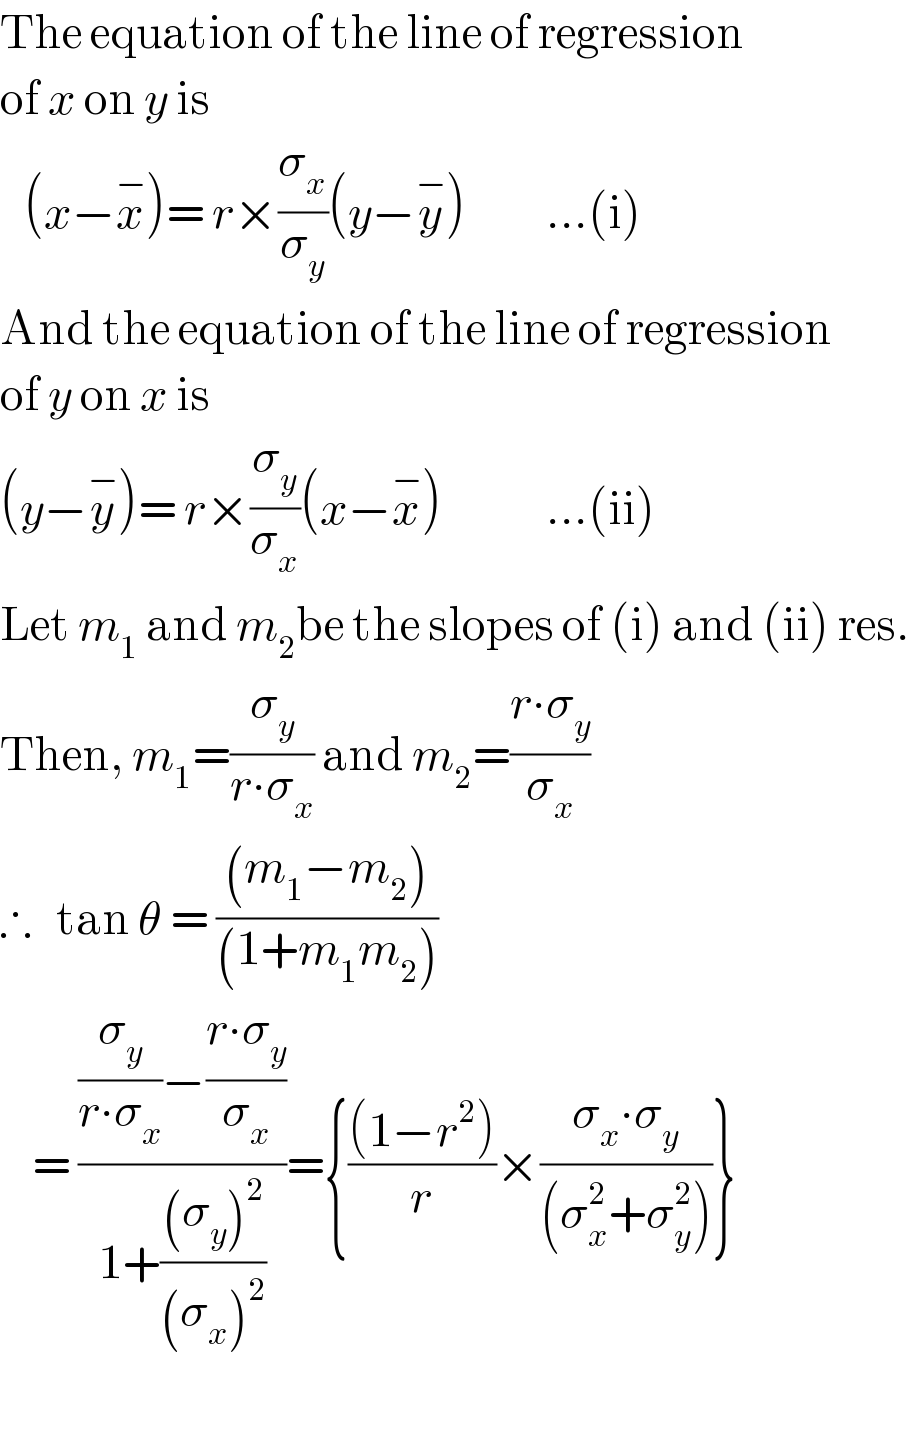 The equation of the line of regression   of x on y is     (x−x^− )= r×(σ_x /σ_y )(y−y^− )          ...(i)  And the equation of the line of regression   of y on x is  (y−y^− )= r×(σ_y /σ_x )(x−x^− )             ...(ii)  Let m_1  and m_2 be the slopes of (i) and (ii) res.  Then, m_1 =(σ_y /(r∙σ_x )) and m_2 =((r∙σ_y )/σ_x )  ∴   tan θ = (((m_1 −m_2 ))/((1+m_1 m_2 )))      = (((σ_y /(r∙σ_x ))−((r∙σ_y )/σ_x ))/(1+(((σ_y )^2 )/((σ_x )^2 ))))={(((1−r^2 ))/r)×((σ_x ∙σ_y )/((σ_x ^2 +σ_y ^2 )))}    